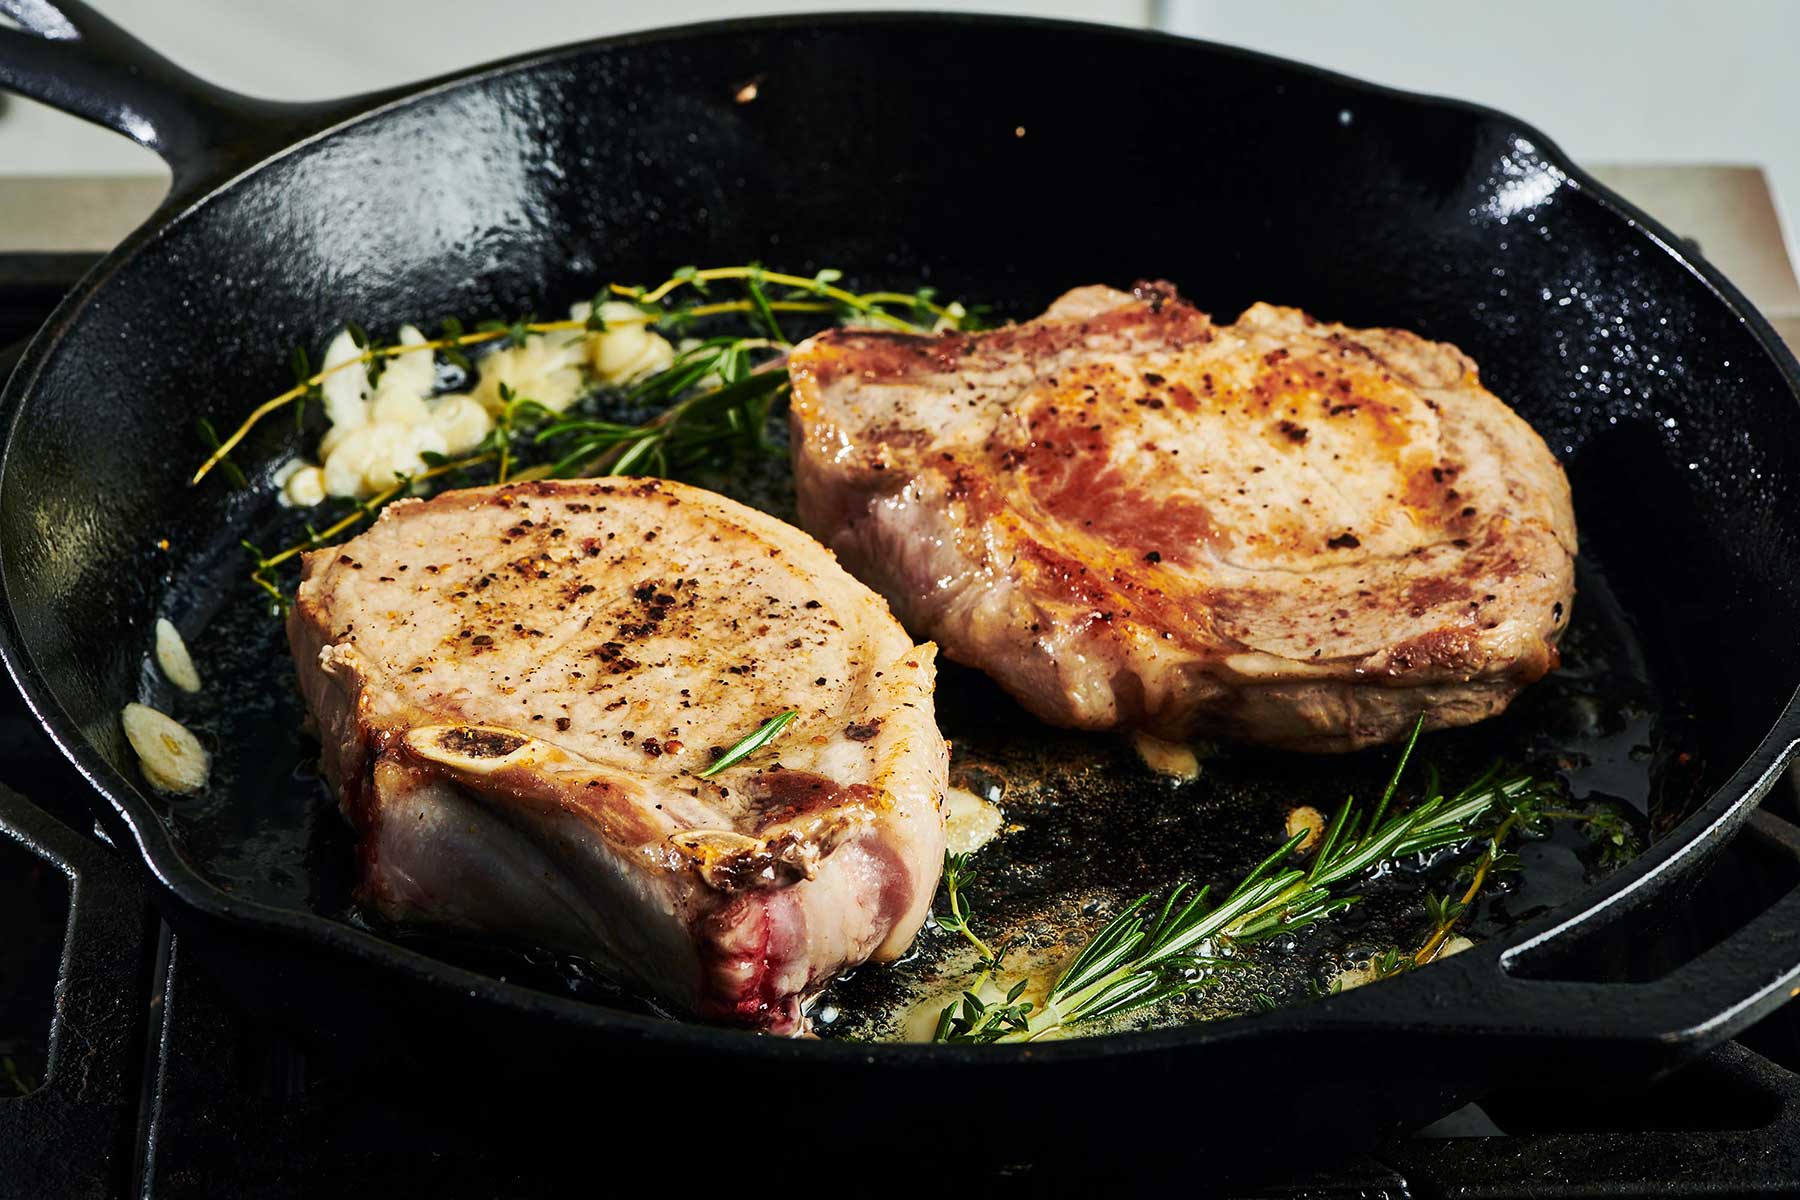 How to Pan Sear Steak, Chicken, and Pork Chops - What is Pan Seared?